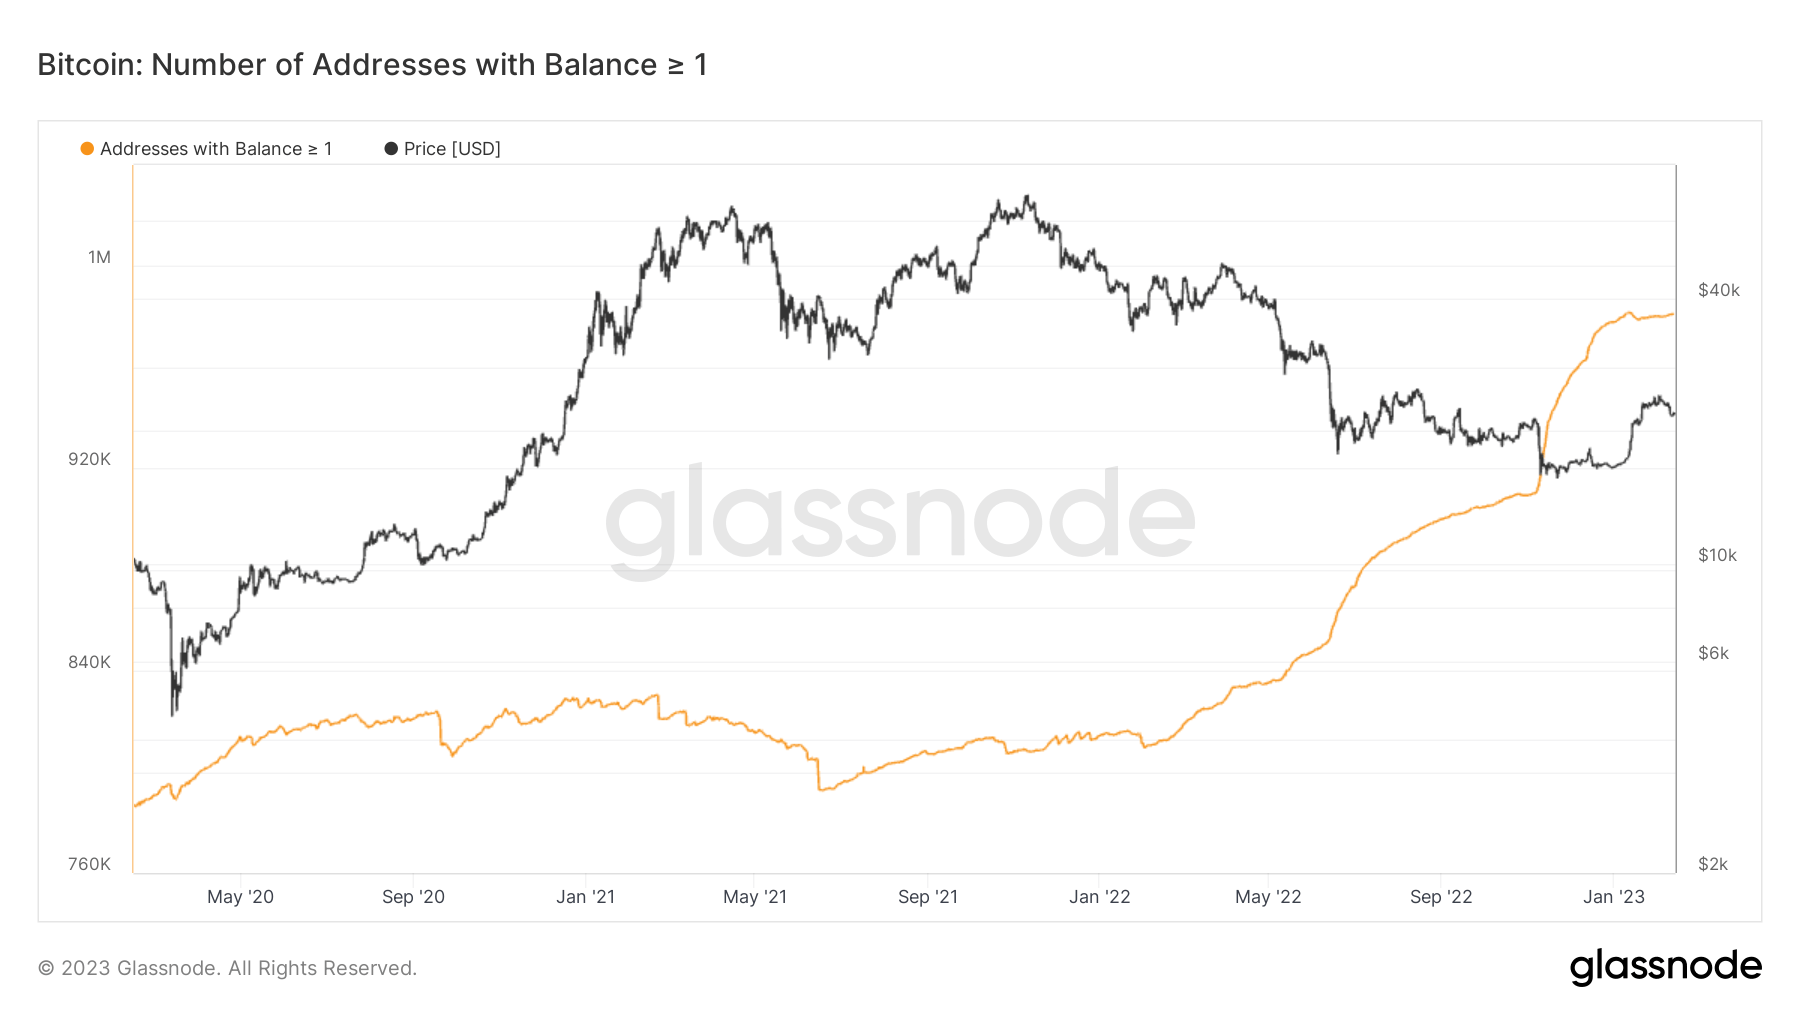 Number of addresses with a balance of 1 Bitcoin or more: (Source: Glassnode)